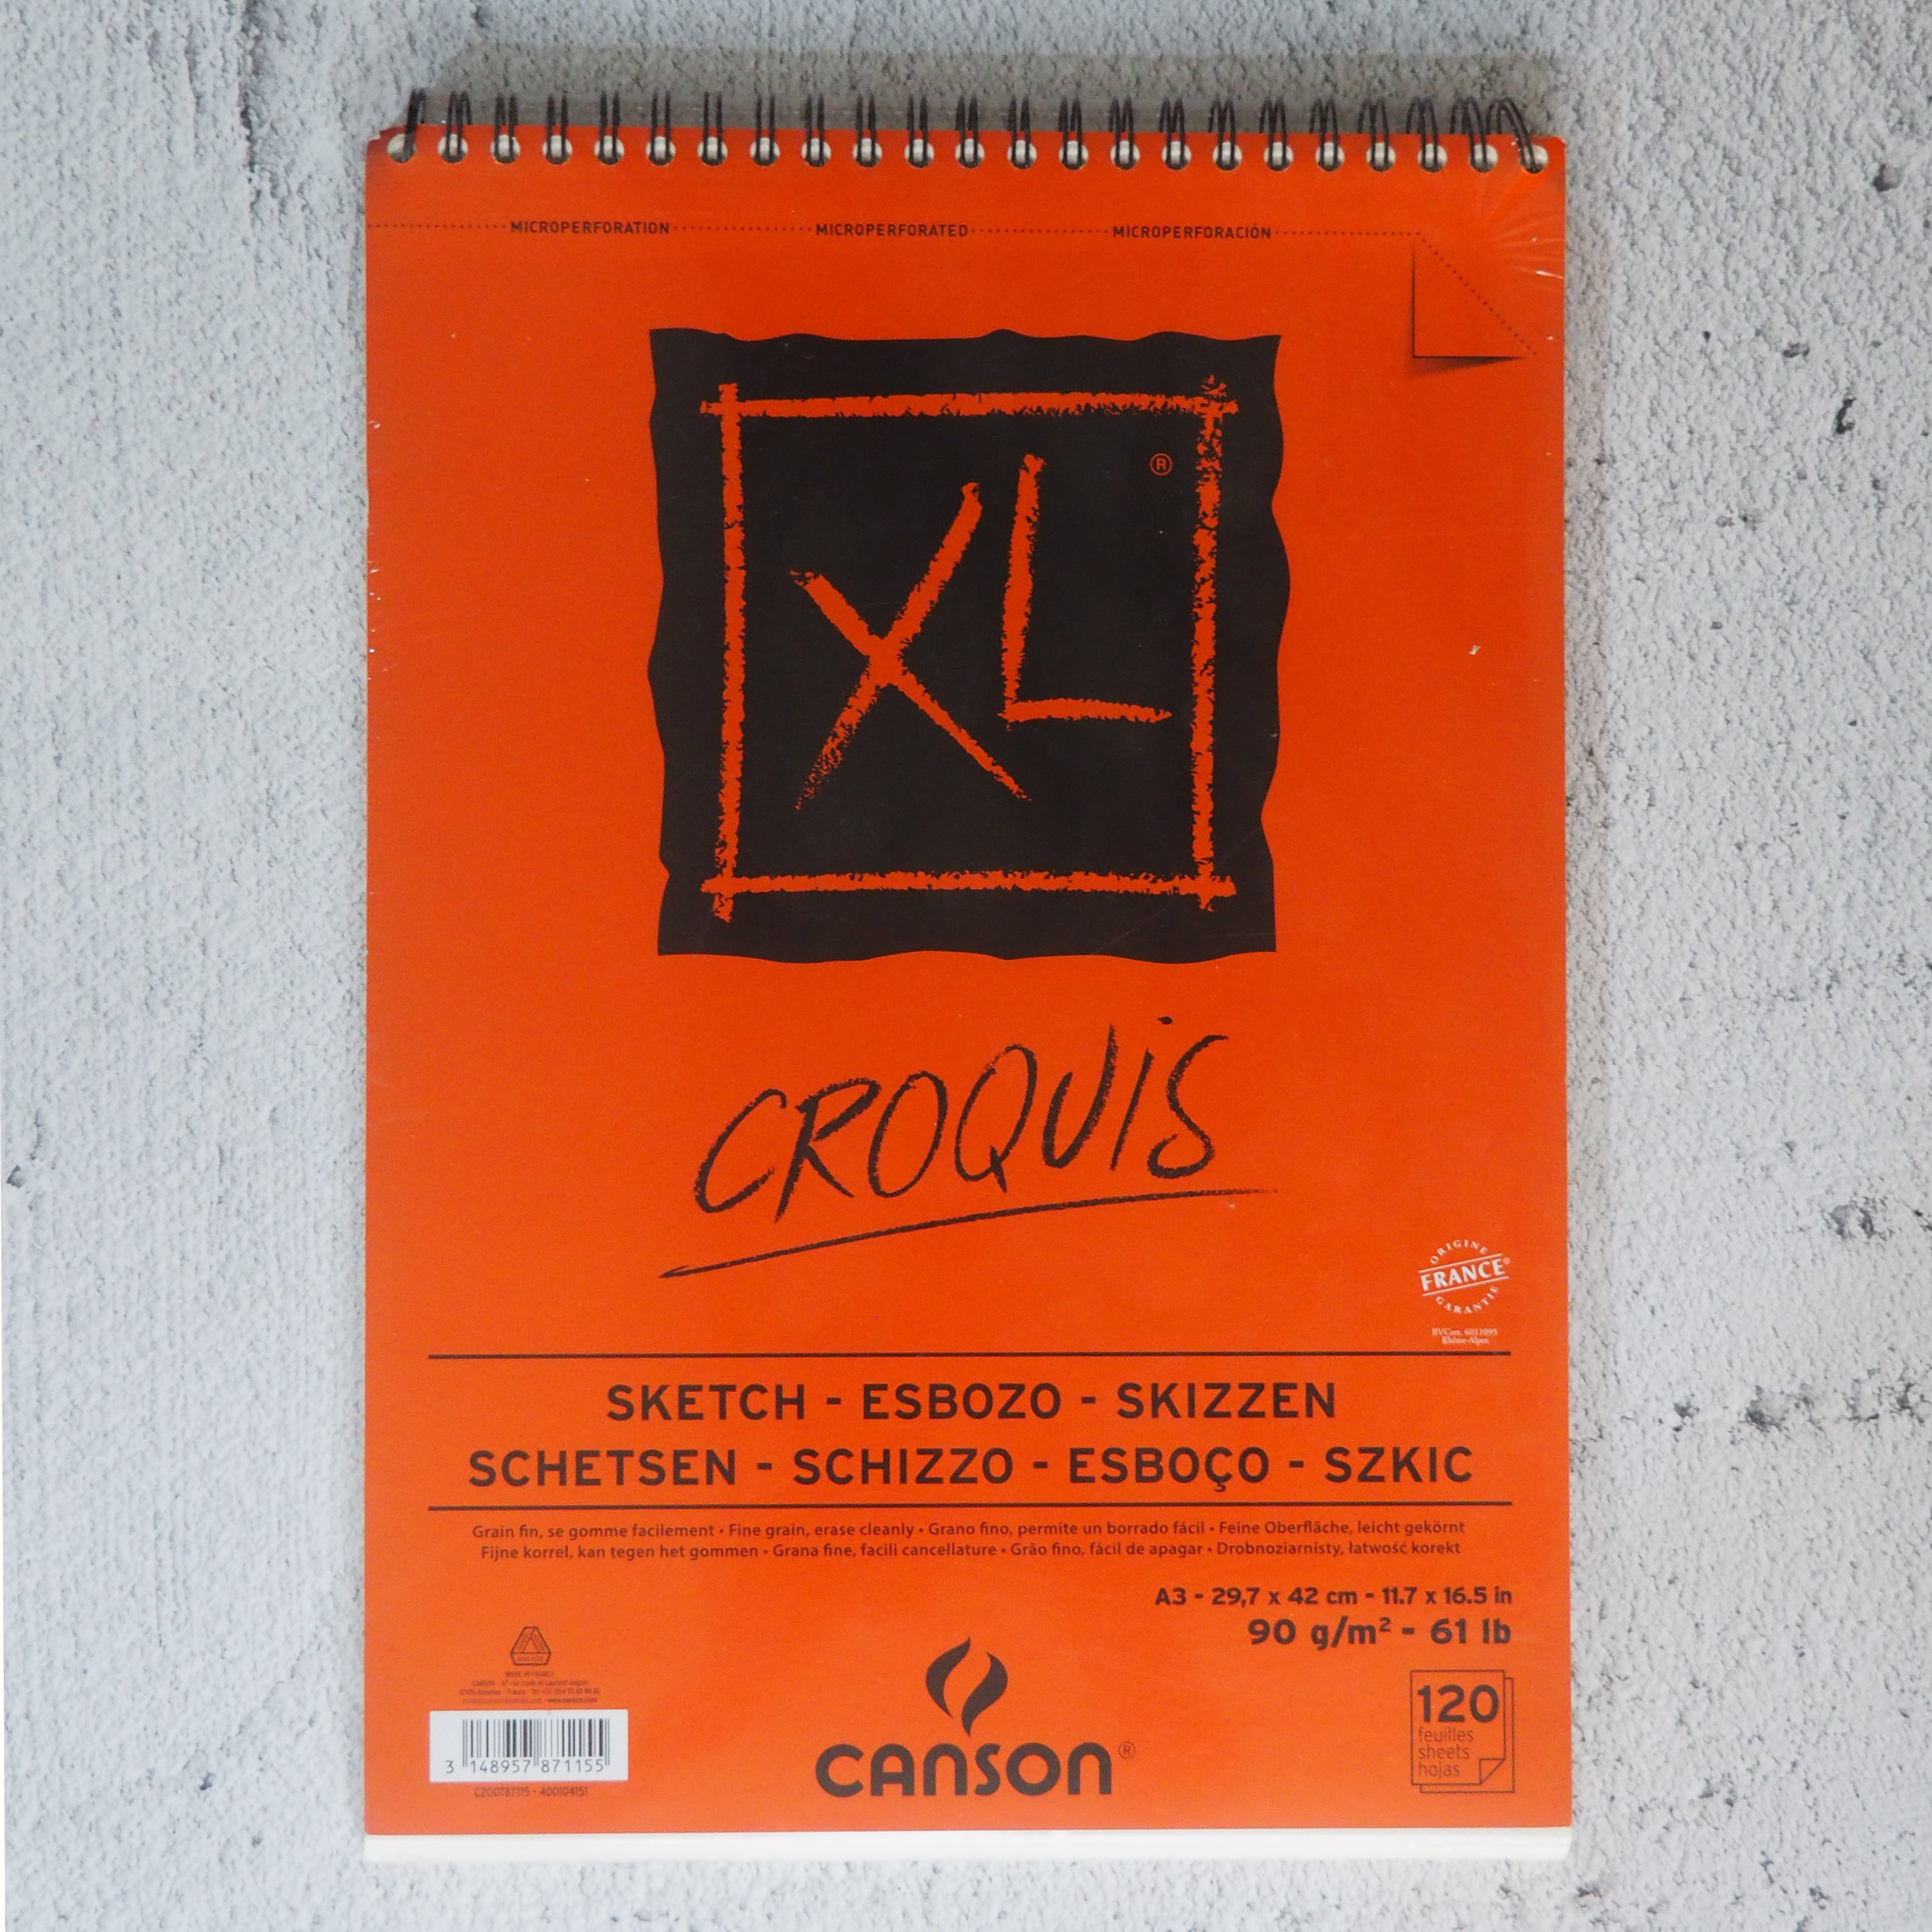 Canson XL Drawing Pads - YouTube